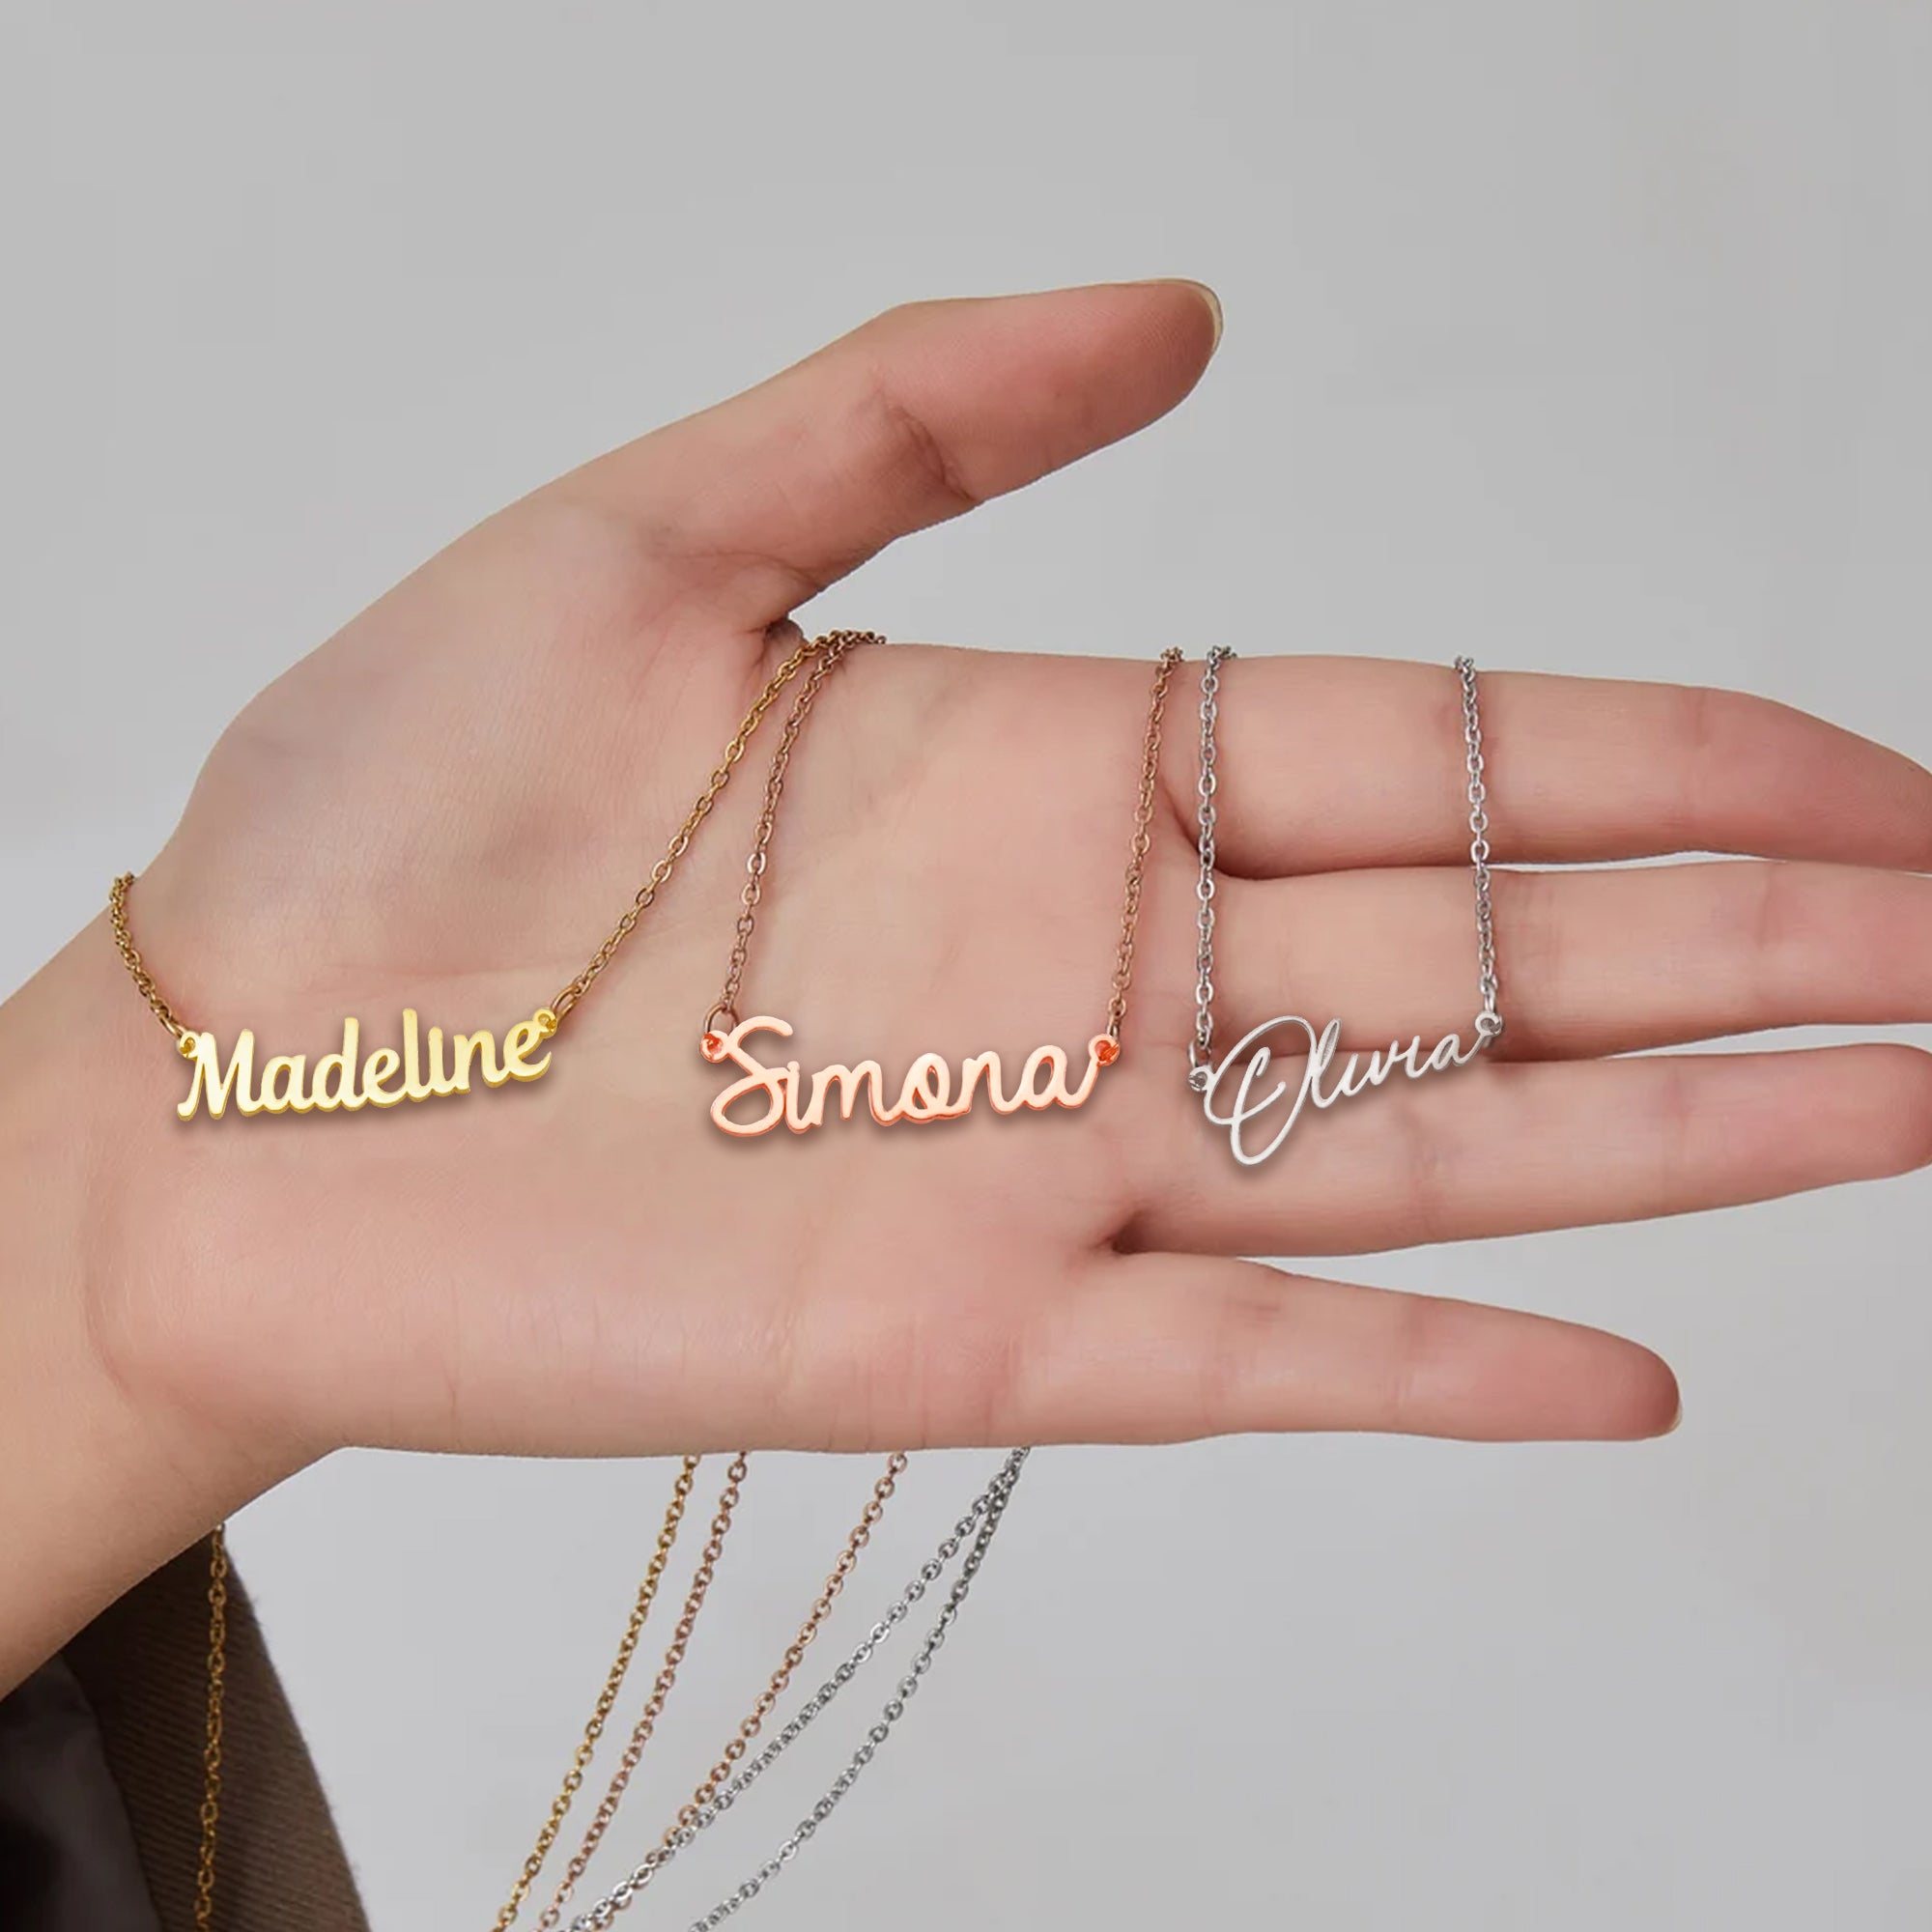 Bestie Forever - Personalized Bestie Name Necklace